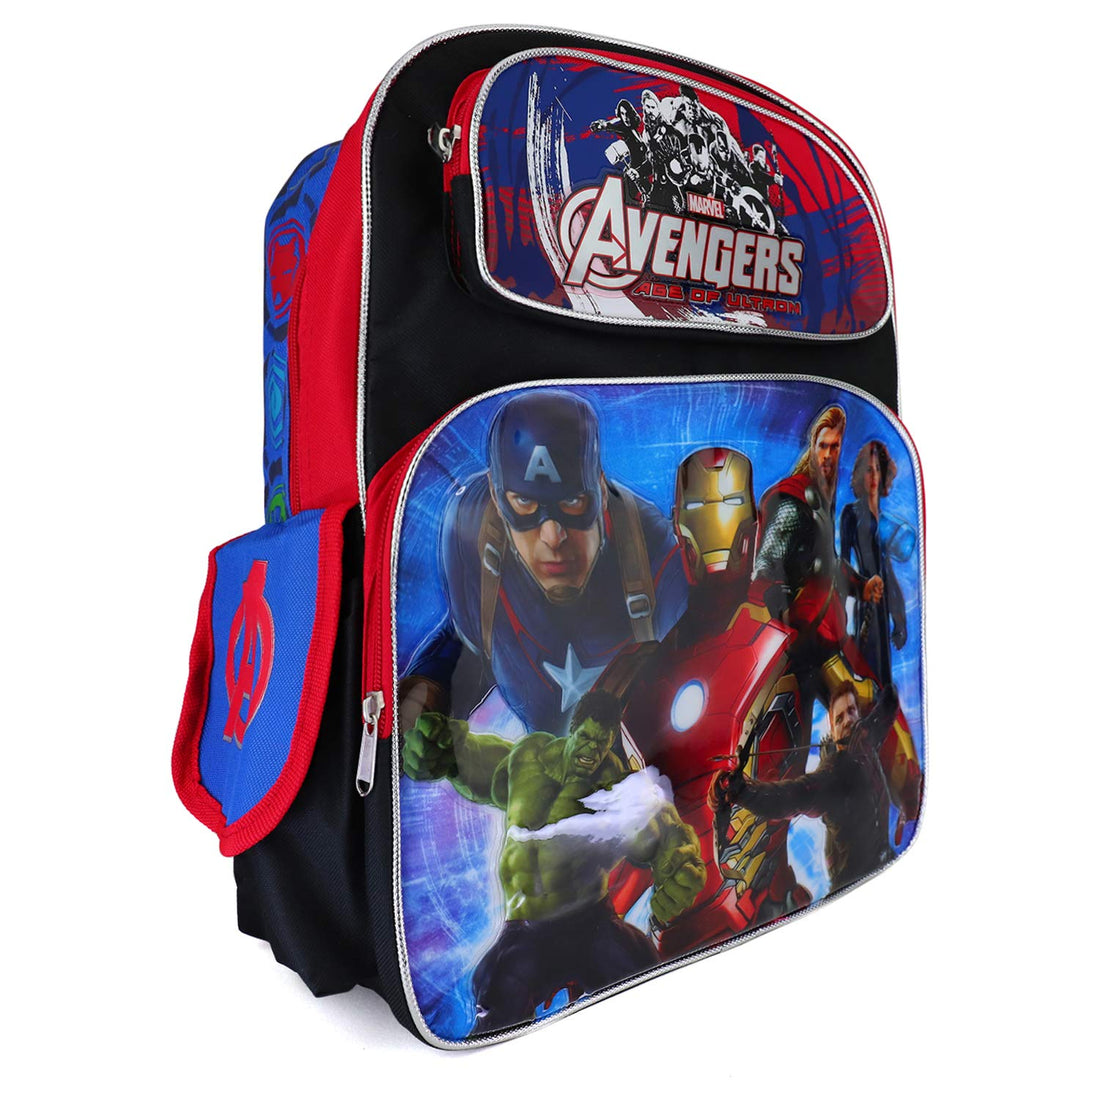 Trendy Apparel Shop Boy's Avengers Age of Ultron Large School Backpack